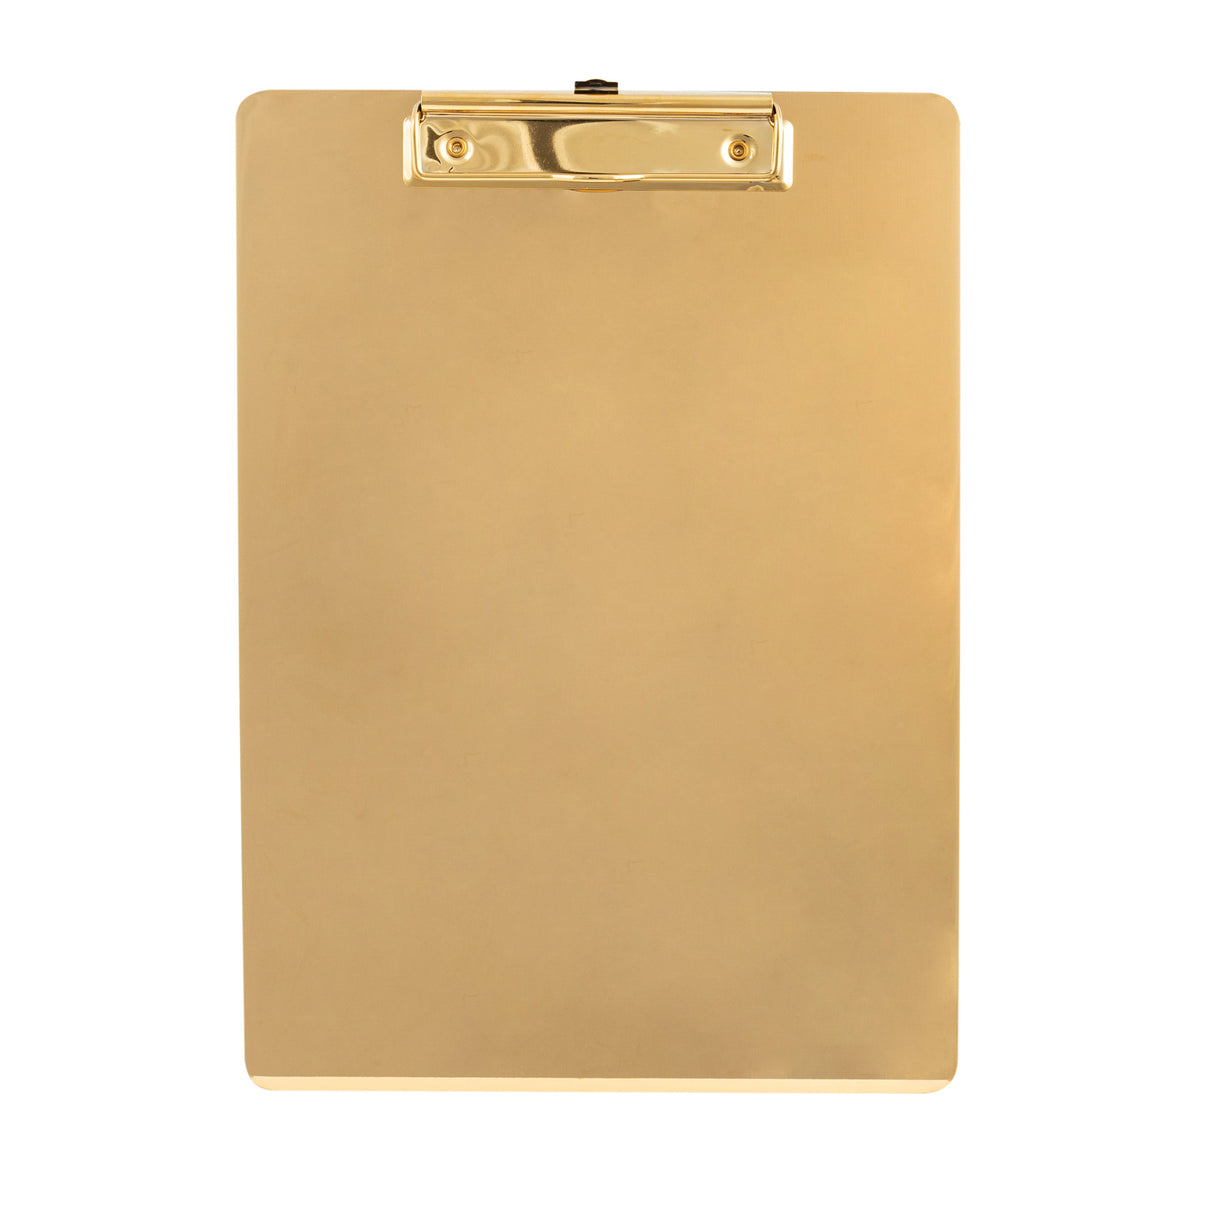 Clipboard - 225X310Mm, Gold: Pack of 1